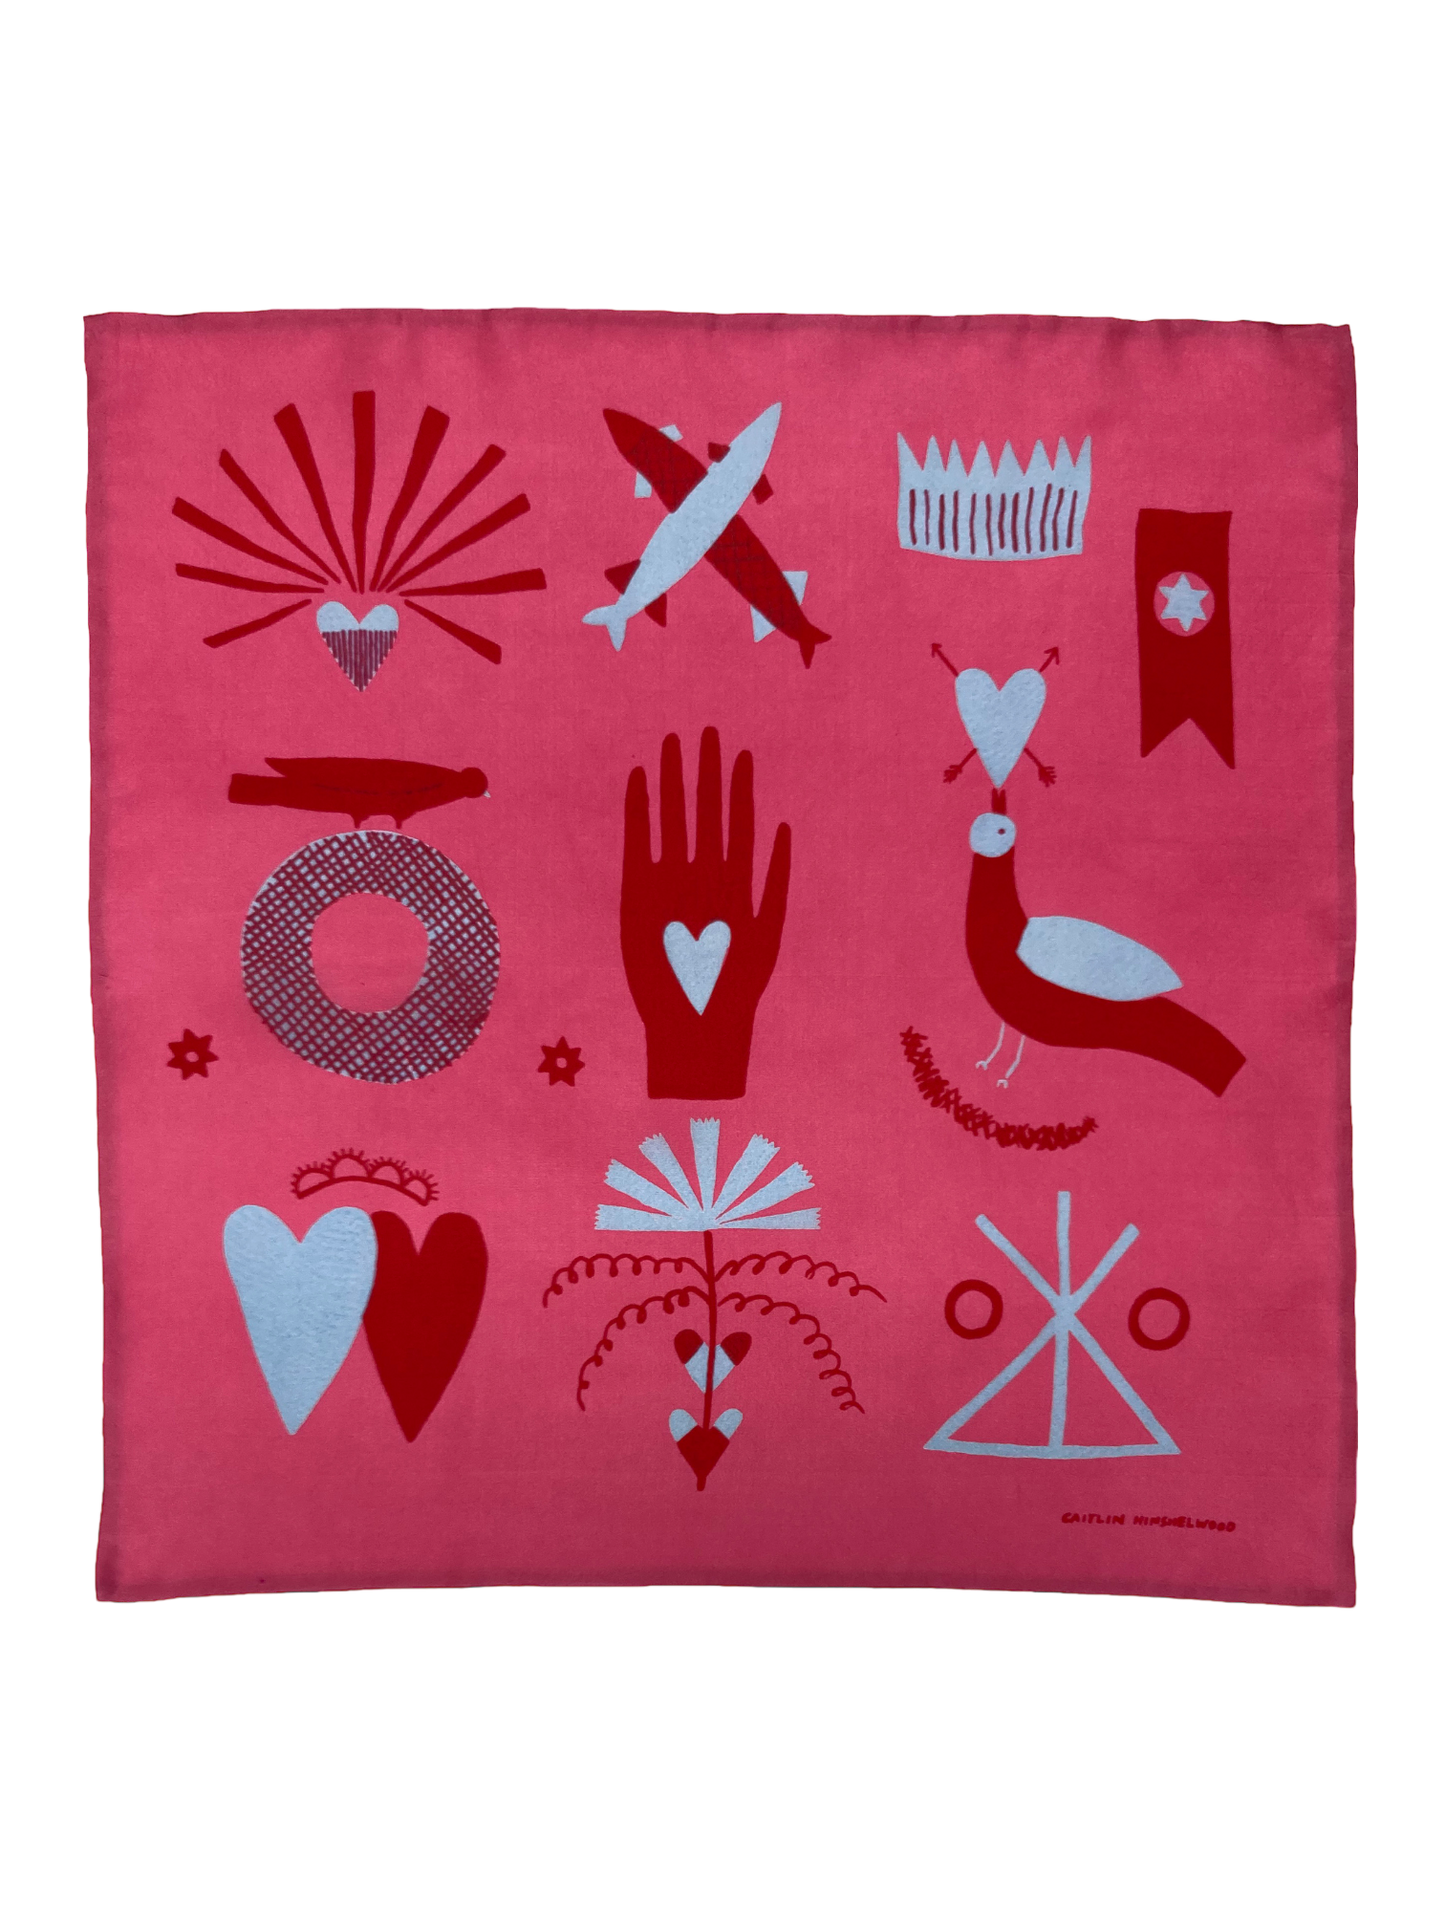 Heart In Hand Silk Scarf in Pink by Caitlin Hinshelwood